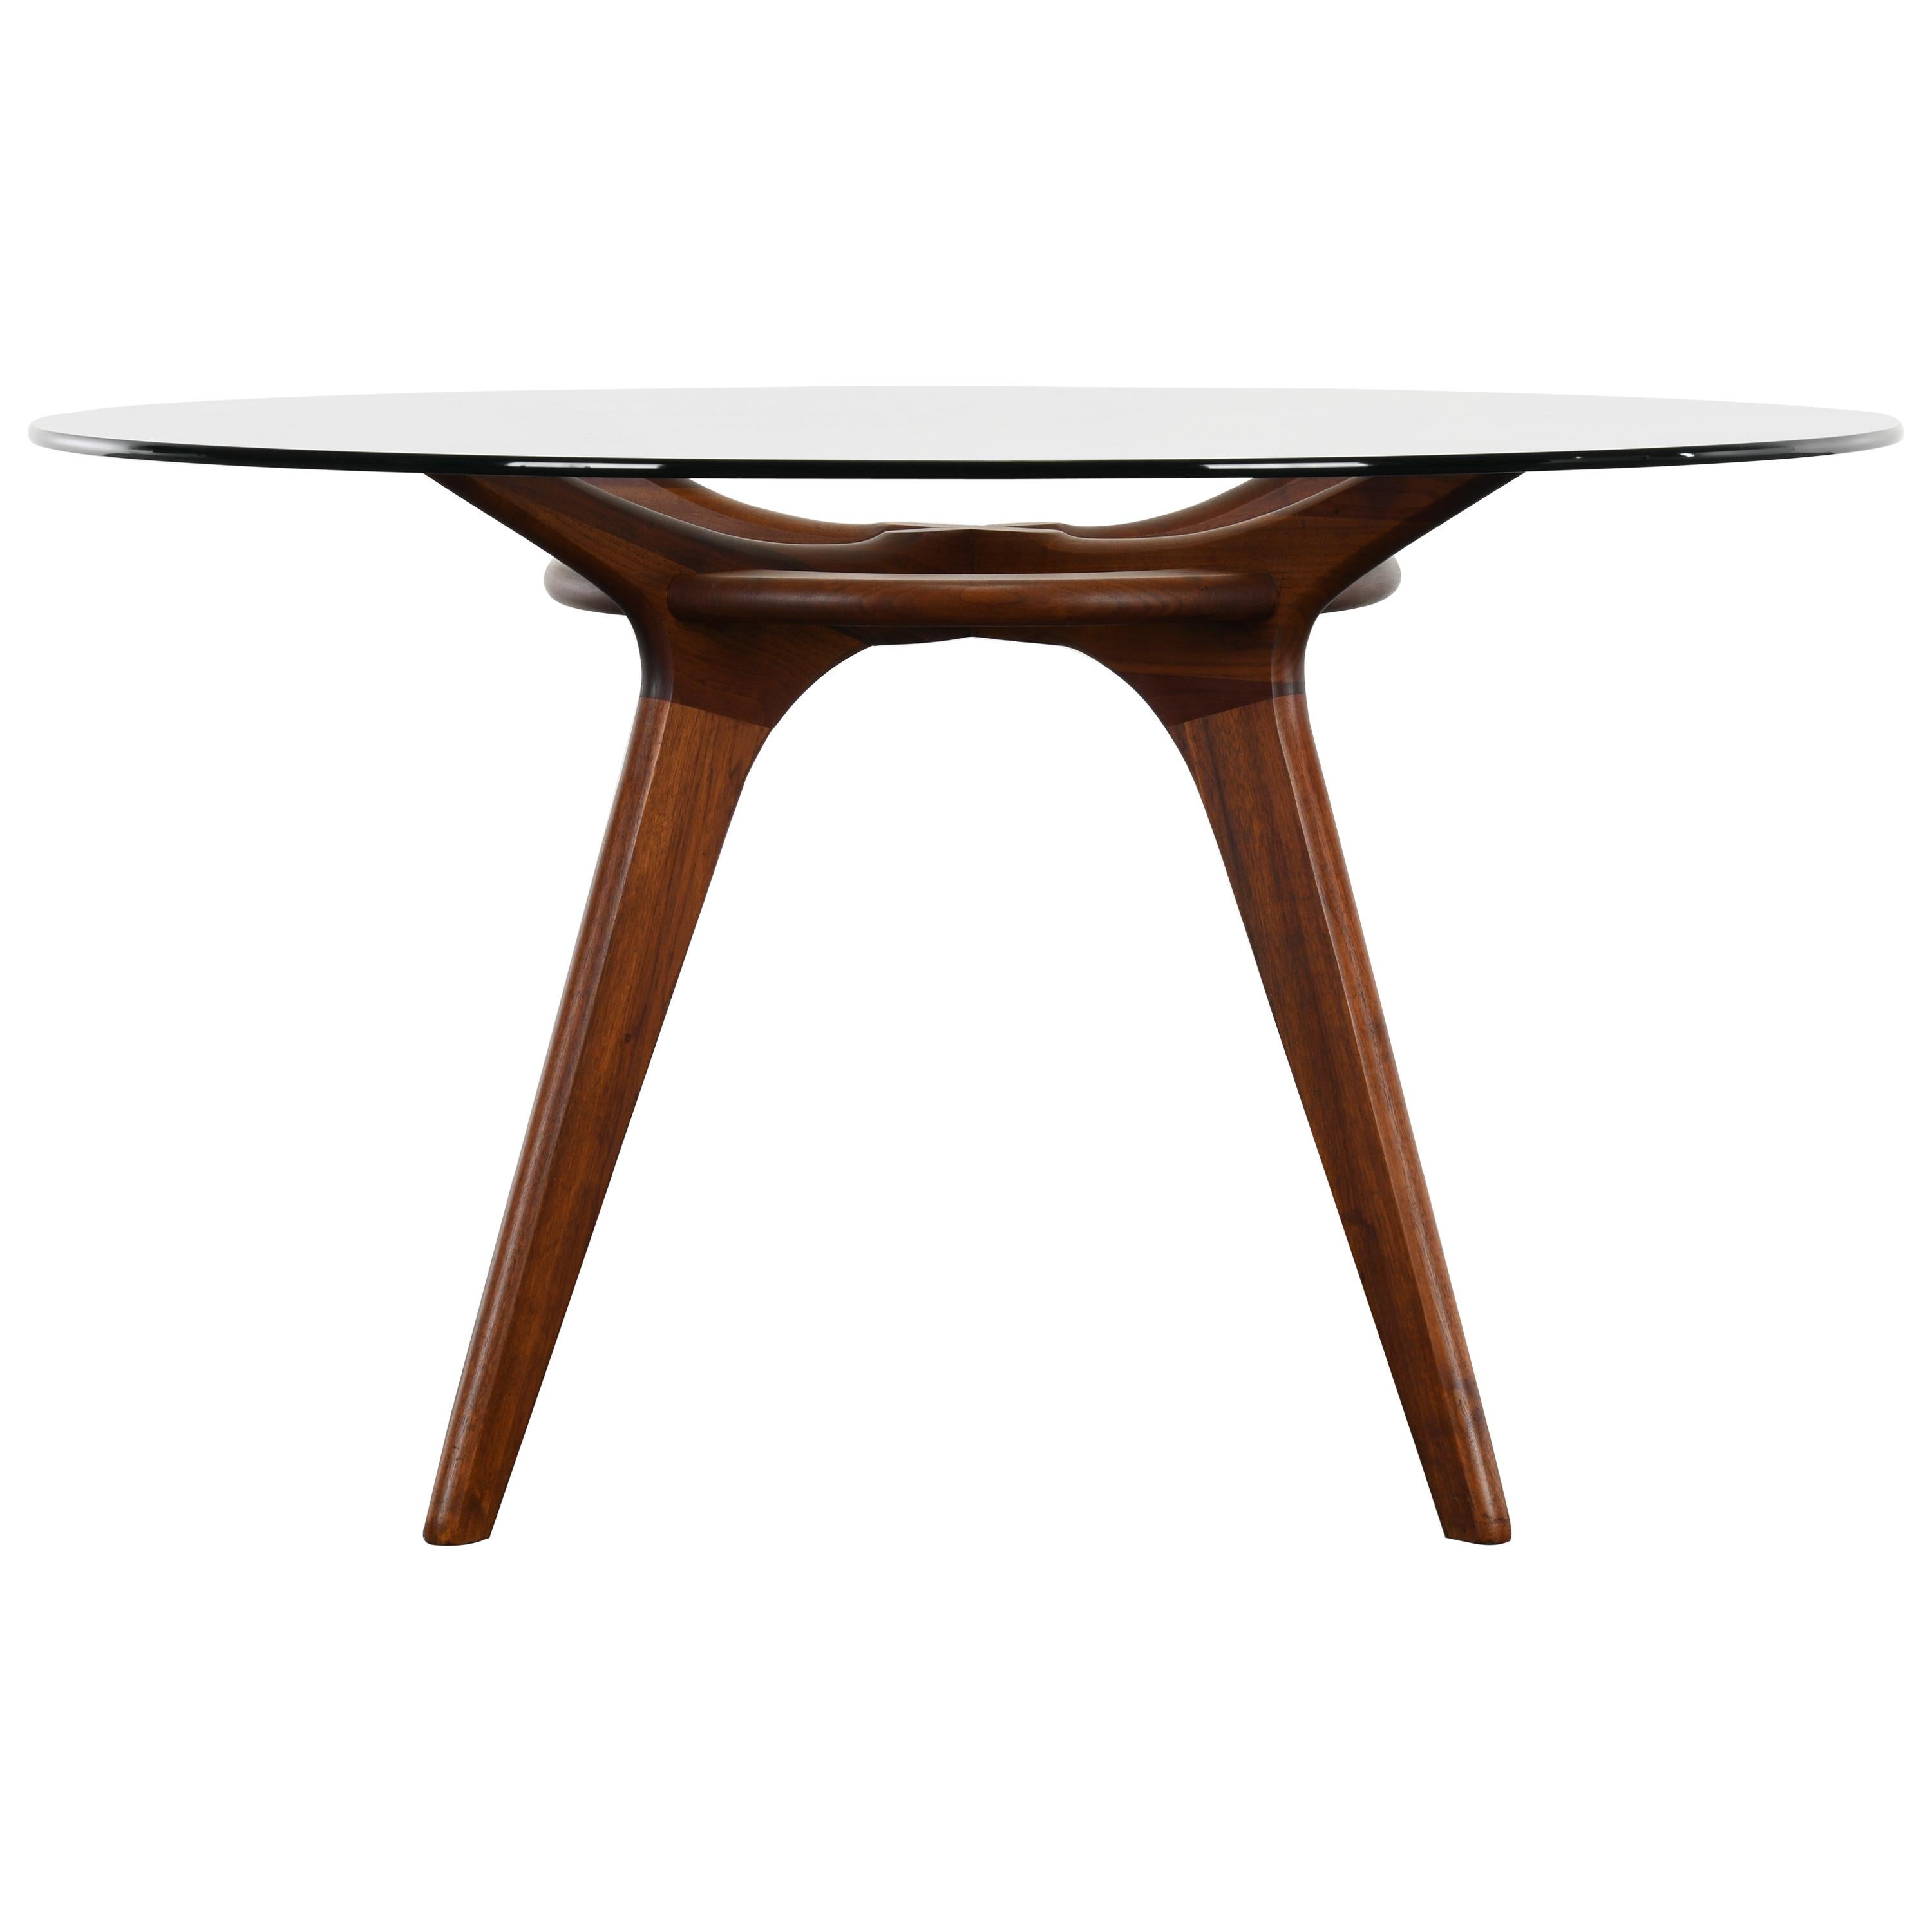 Adrian Pearsall for Craft Associates Walnut Dining Table, 1960s